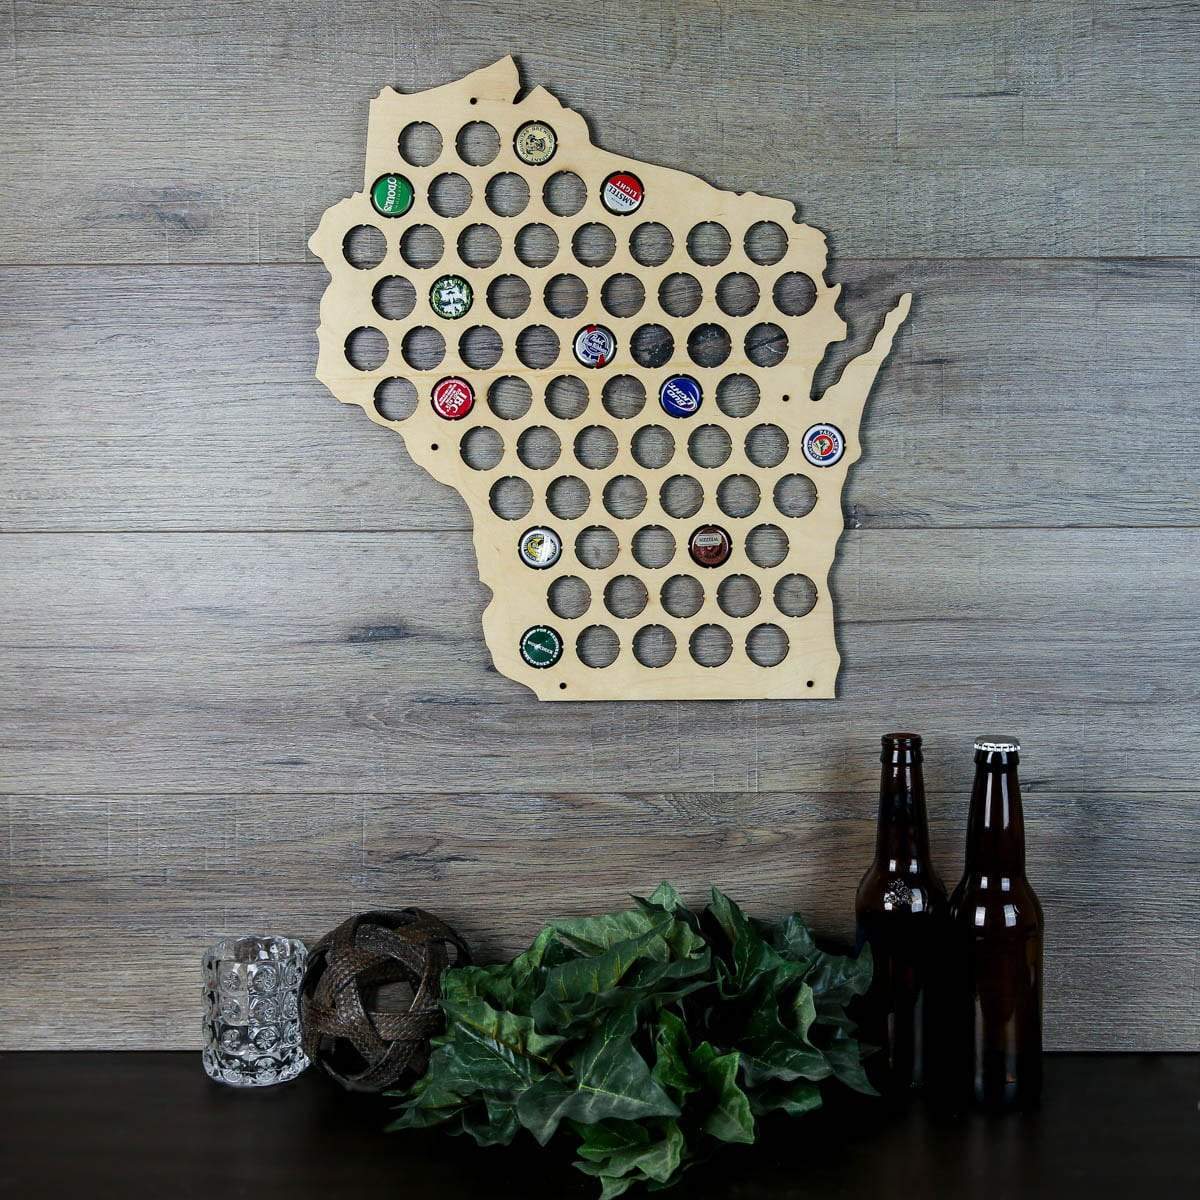 Torched Products Beer Bottle Cap Holder Wisconsin Beer Cap Map (777583198325)